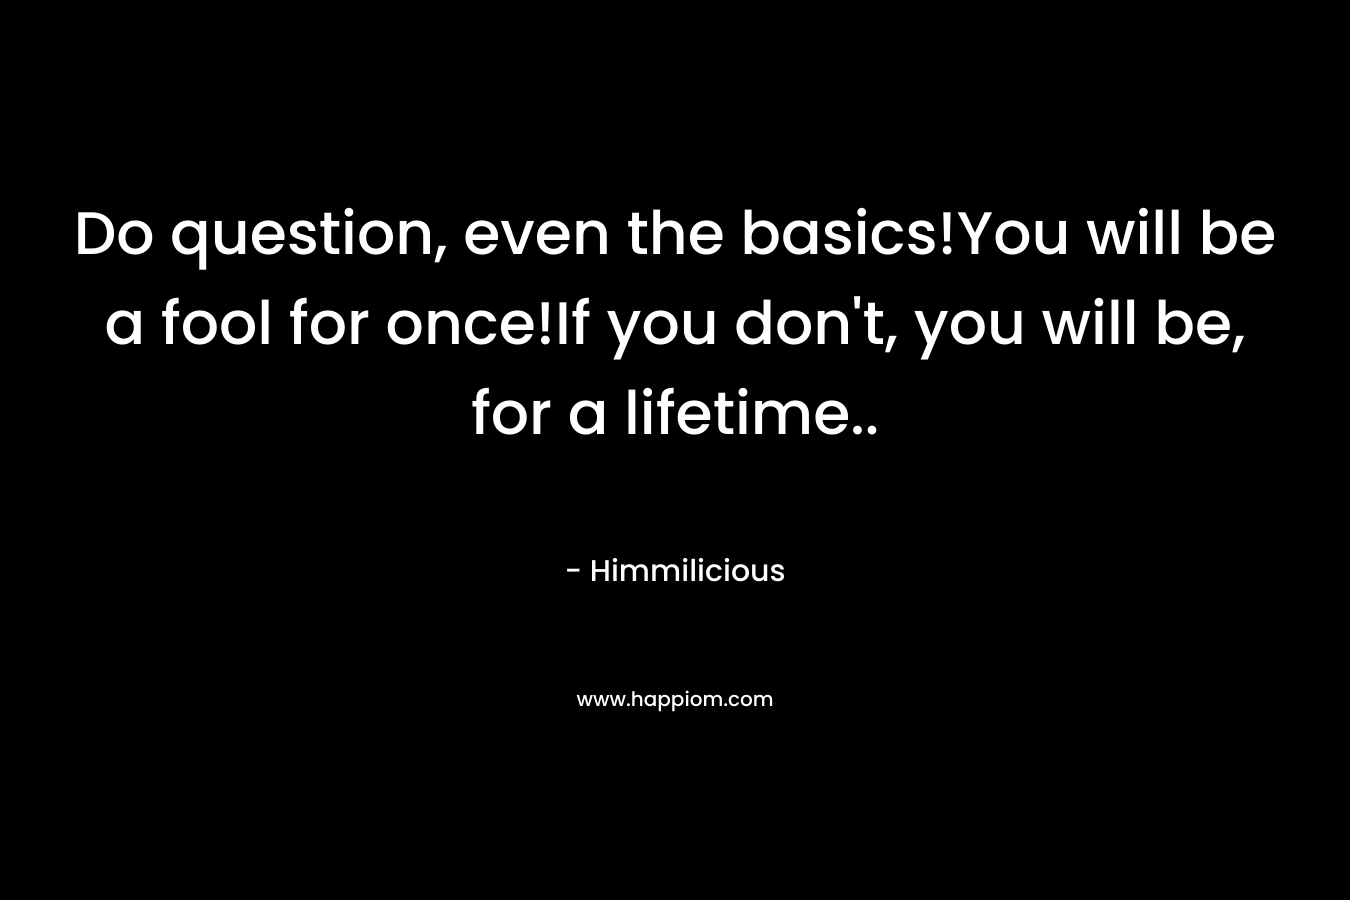 Do question, even the basics!You will be a fool for once!If you don't, you will be, for a lifetime..